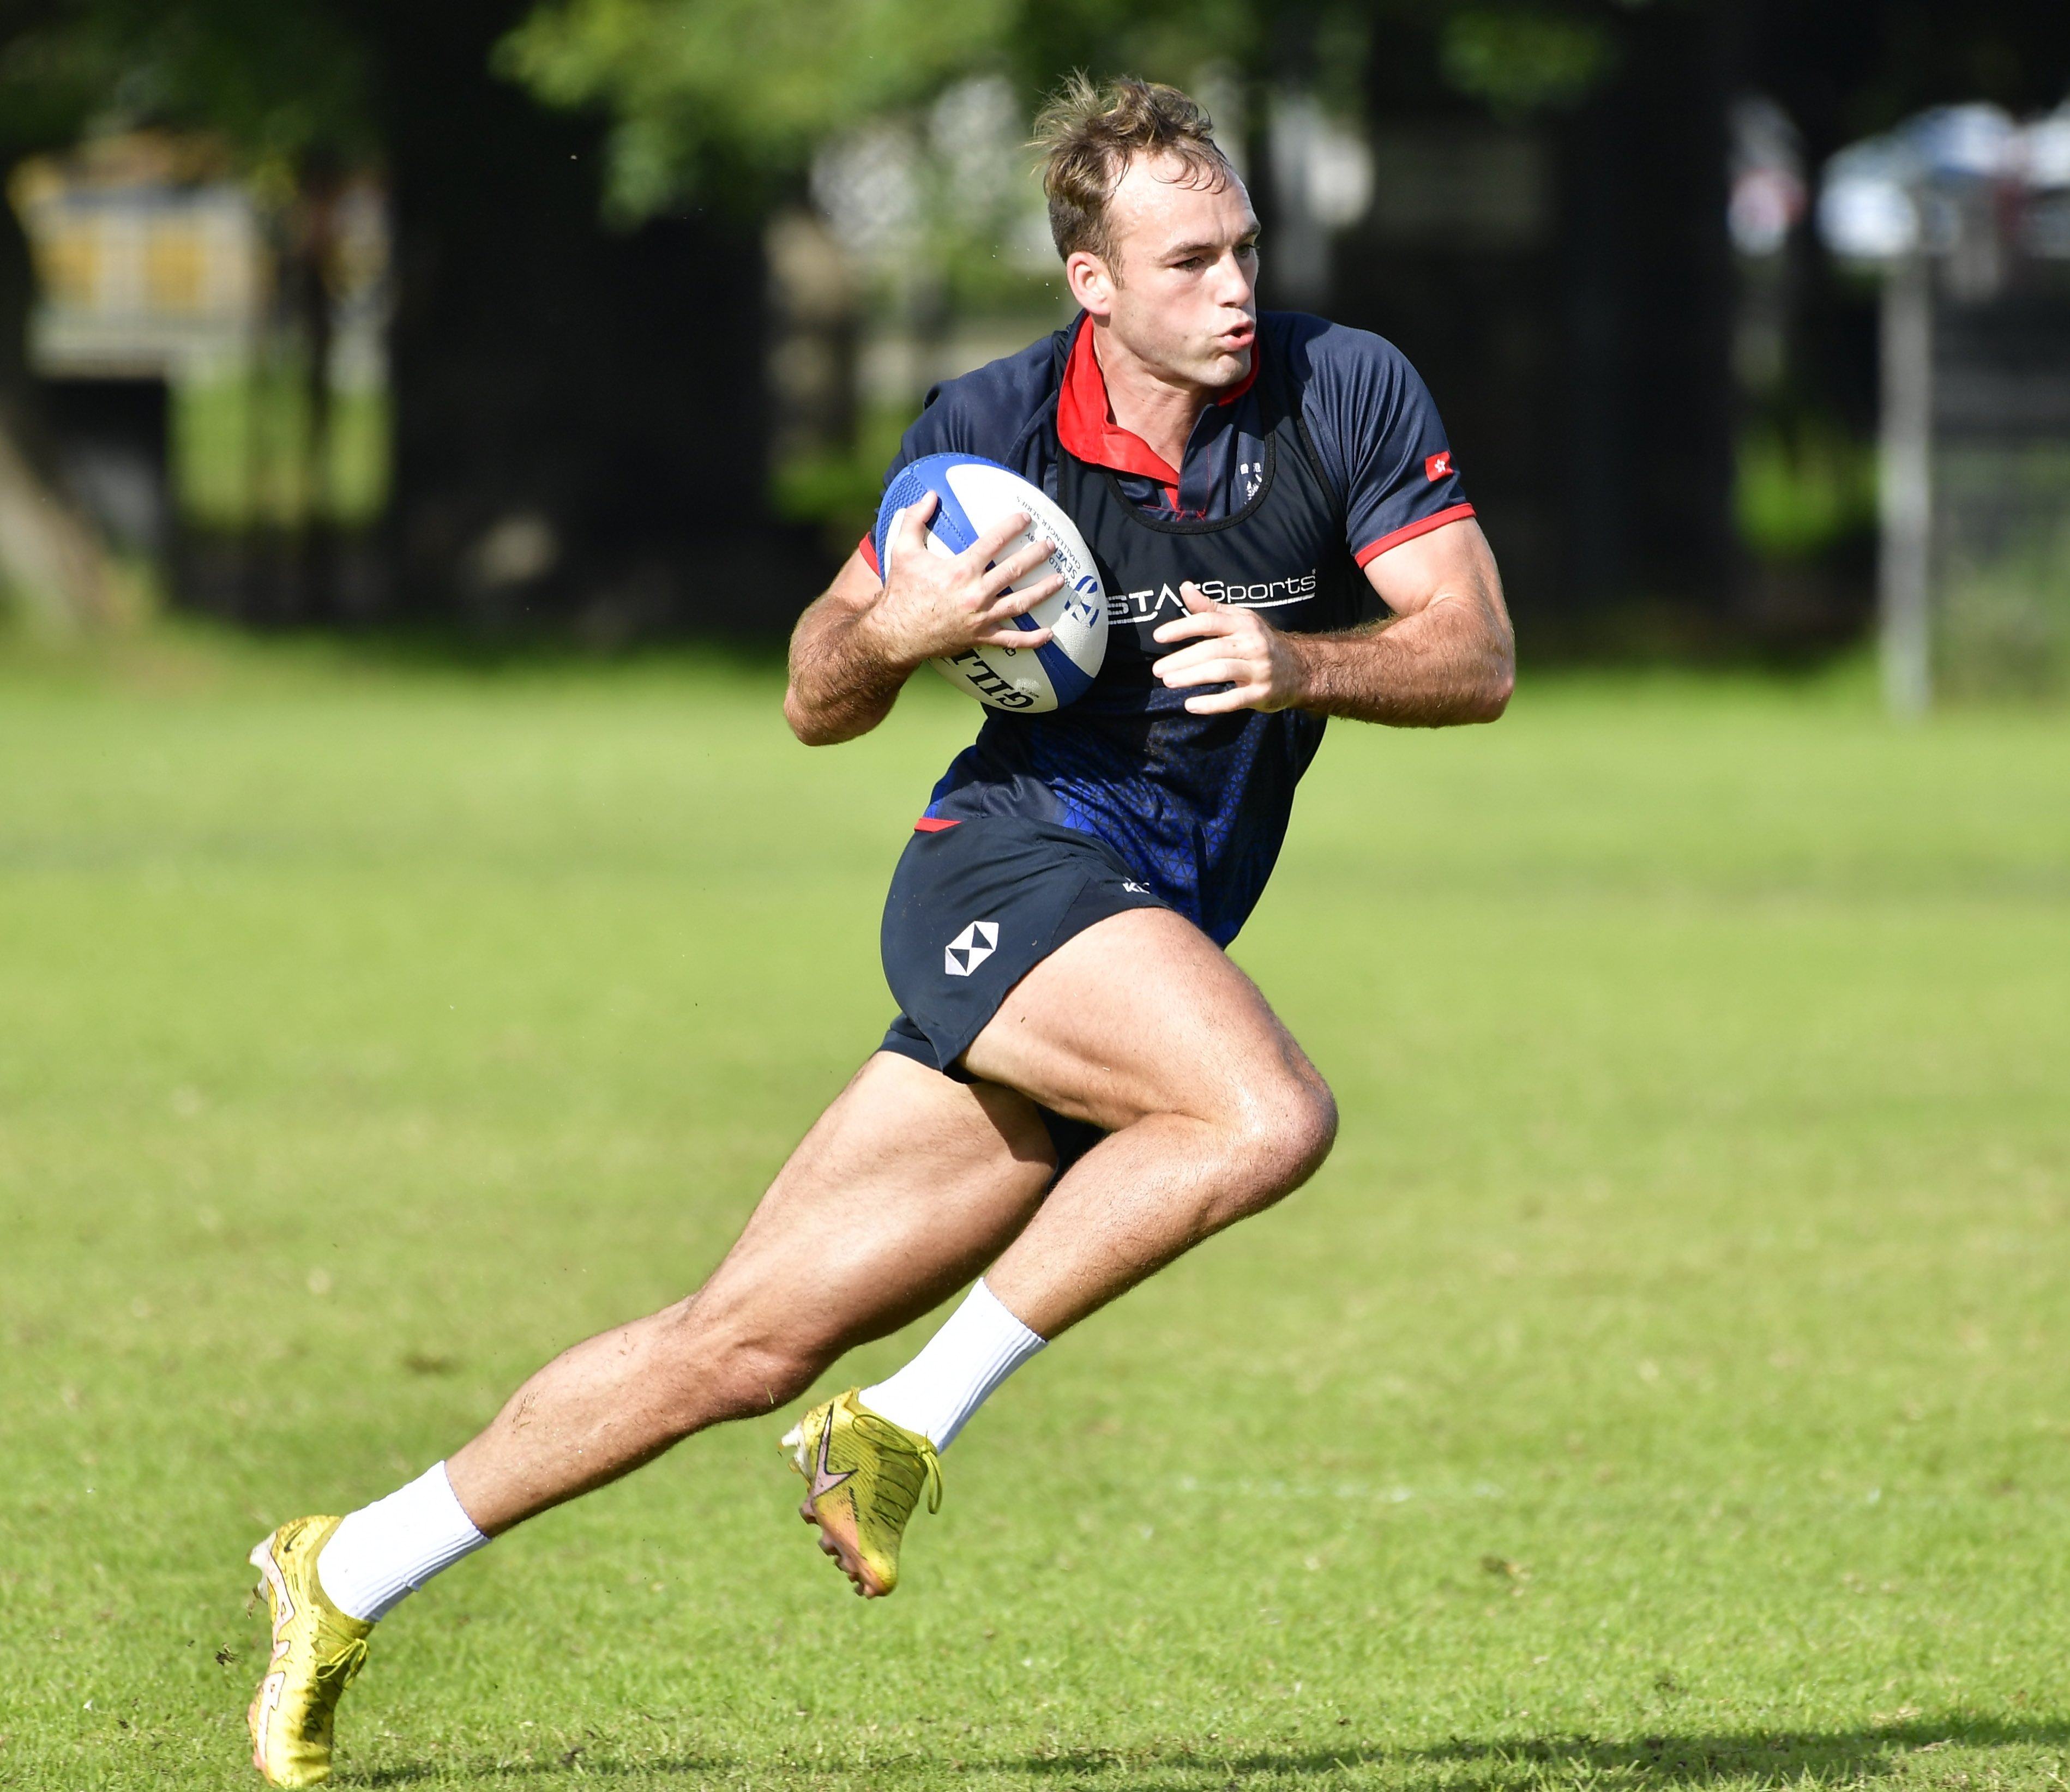 Harry Sayers comes into the Hong Kong squad for the second leg of the World Rugby Sevens Challenger Series in South Africa. Photo: Handout